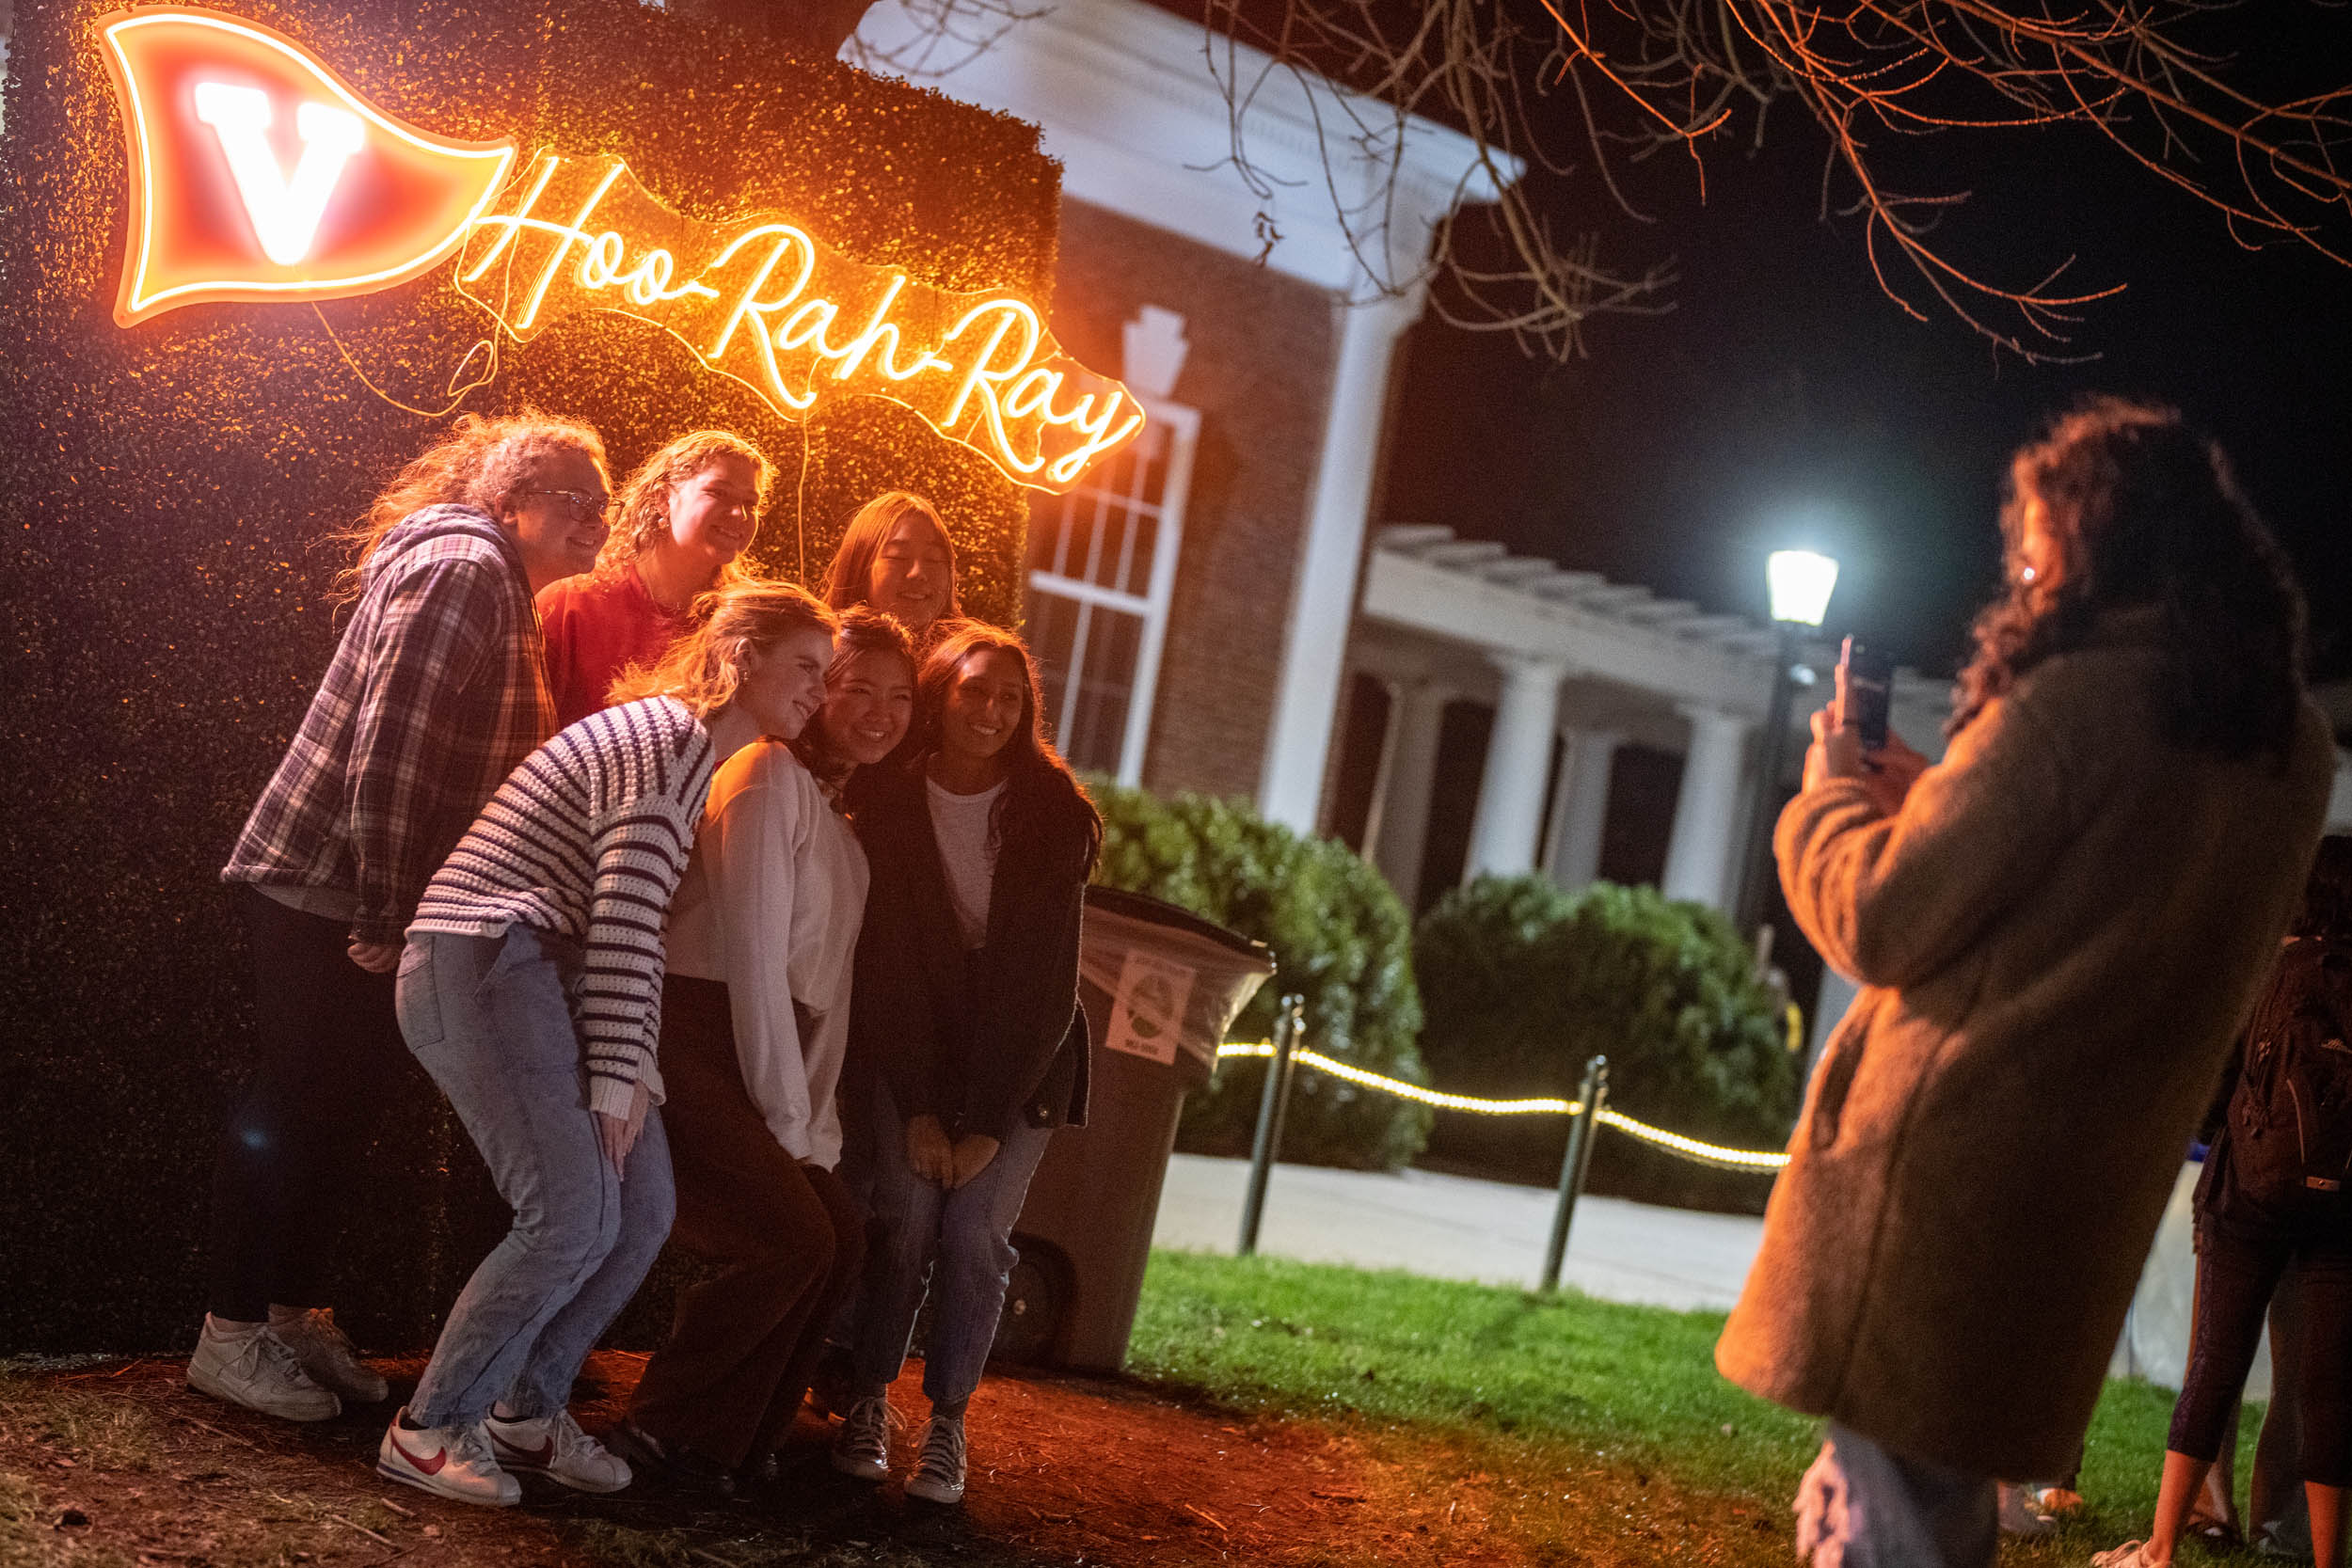 Group of students taking a group picture under the Hoo Rah ray neon sign